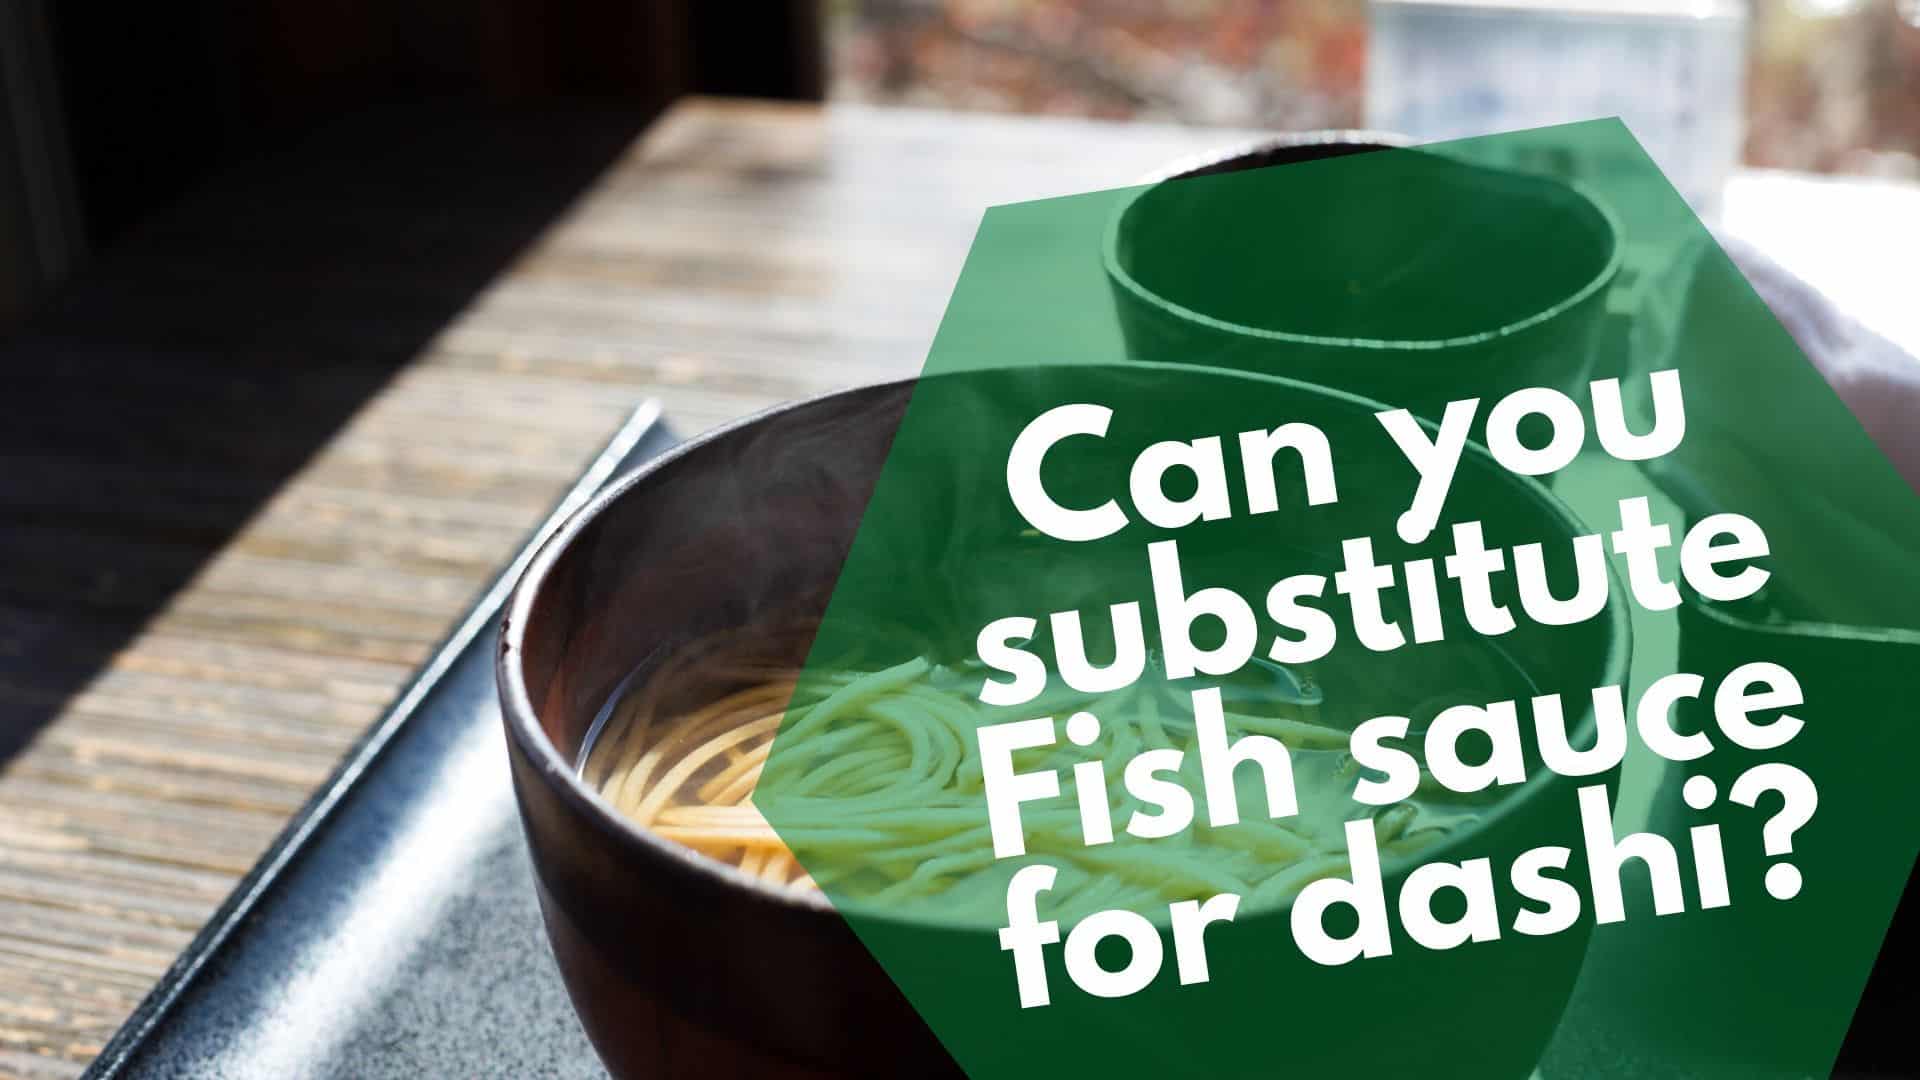 Can you substitute Fish sauce for dashi